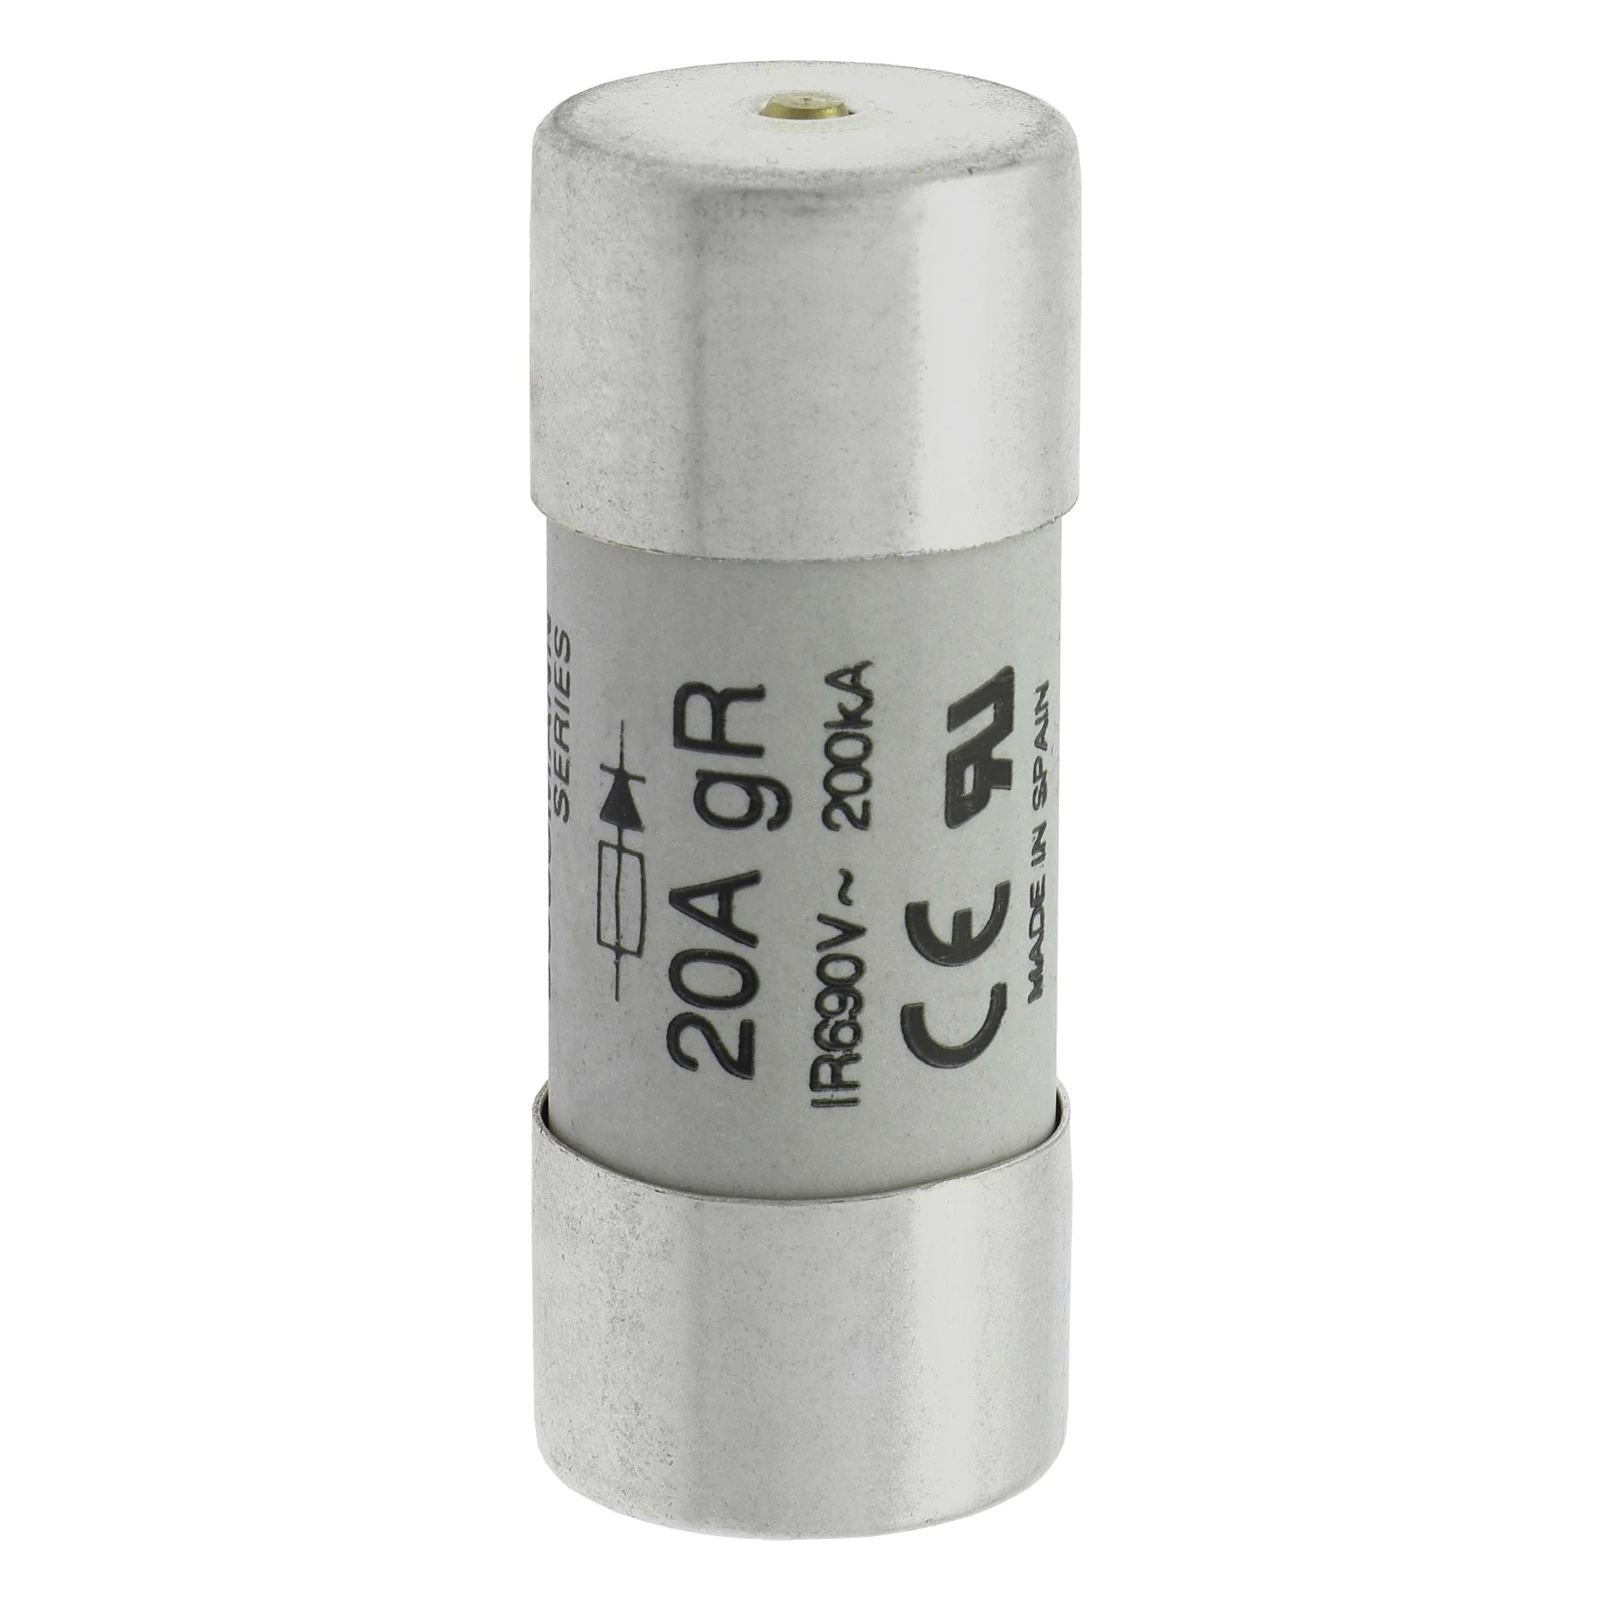 3038456 - Eaton Fuse 20A 690VAC gR 22x58 with Ind